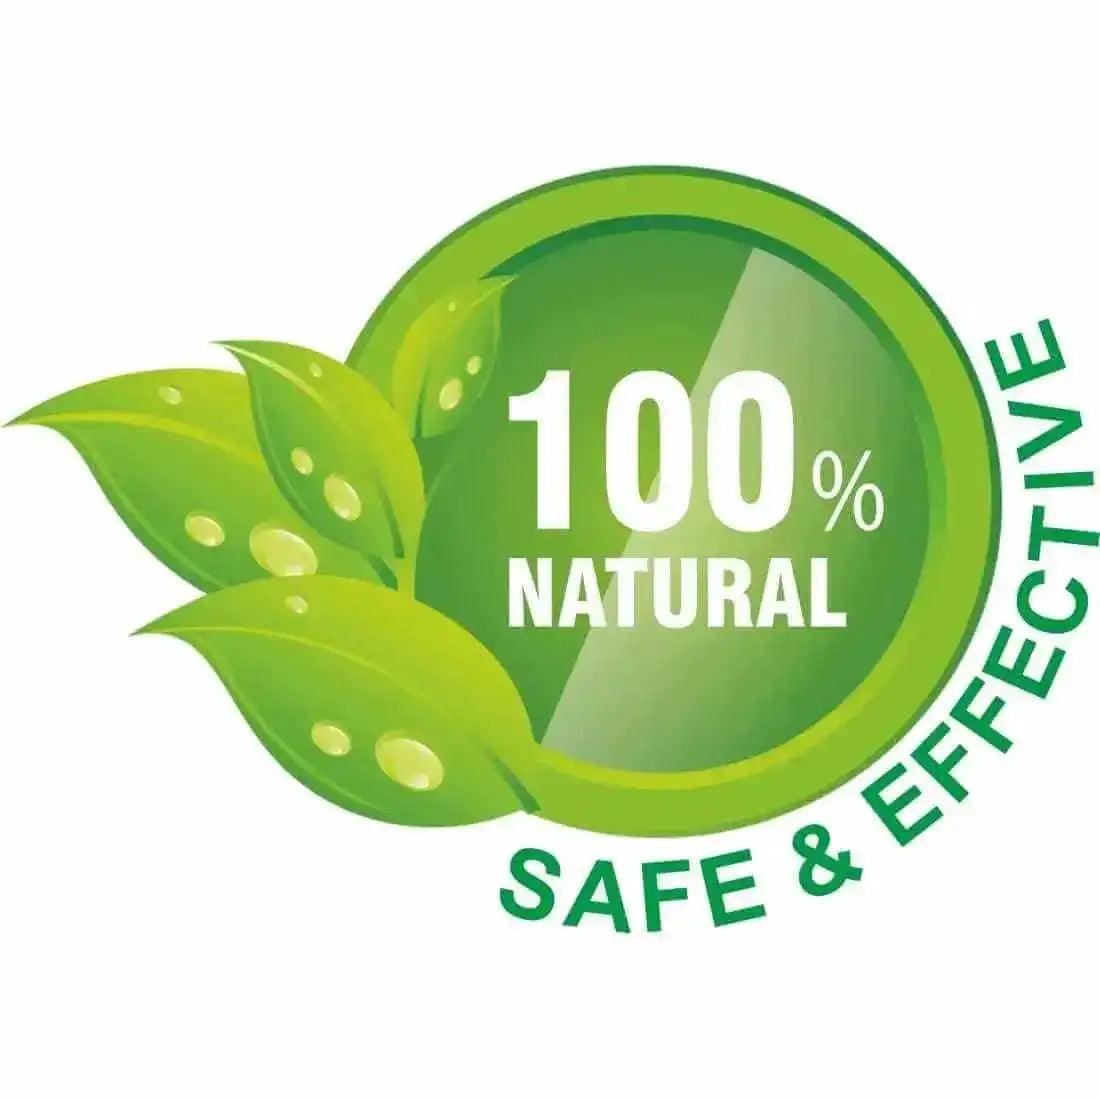 Nature Sure Pores and Marks Oil is 100% natural, safe and effective - everteen-neud.com